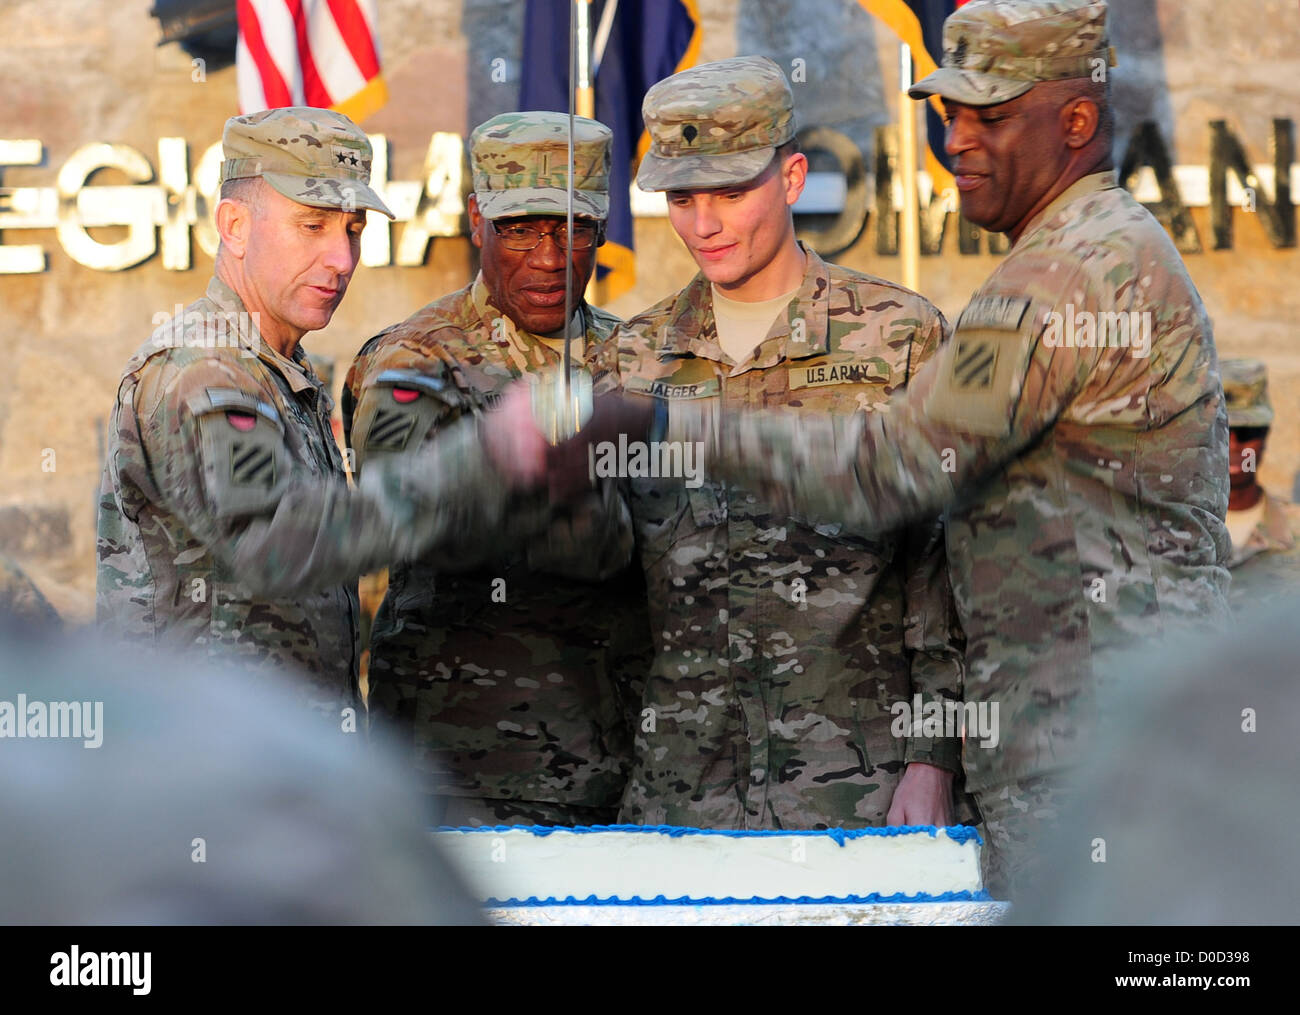 From left, Maj. Gen. Robert â€œAbeâ€ Abrams, 3rd Infantry Division and Regional Command (South) commanding general, Chief Warrant Officer 5 Raymond Noble, Spc. James Jaeger, and Command Sgt. Maj. Edd Watson, 3rd Infantry Division and Regional Command (So Stock Photo